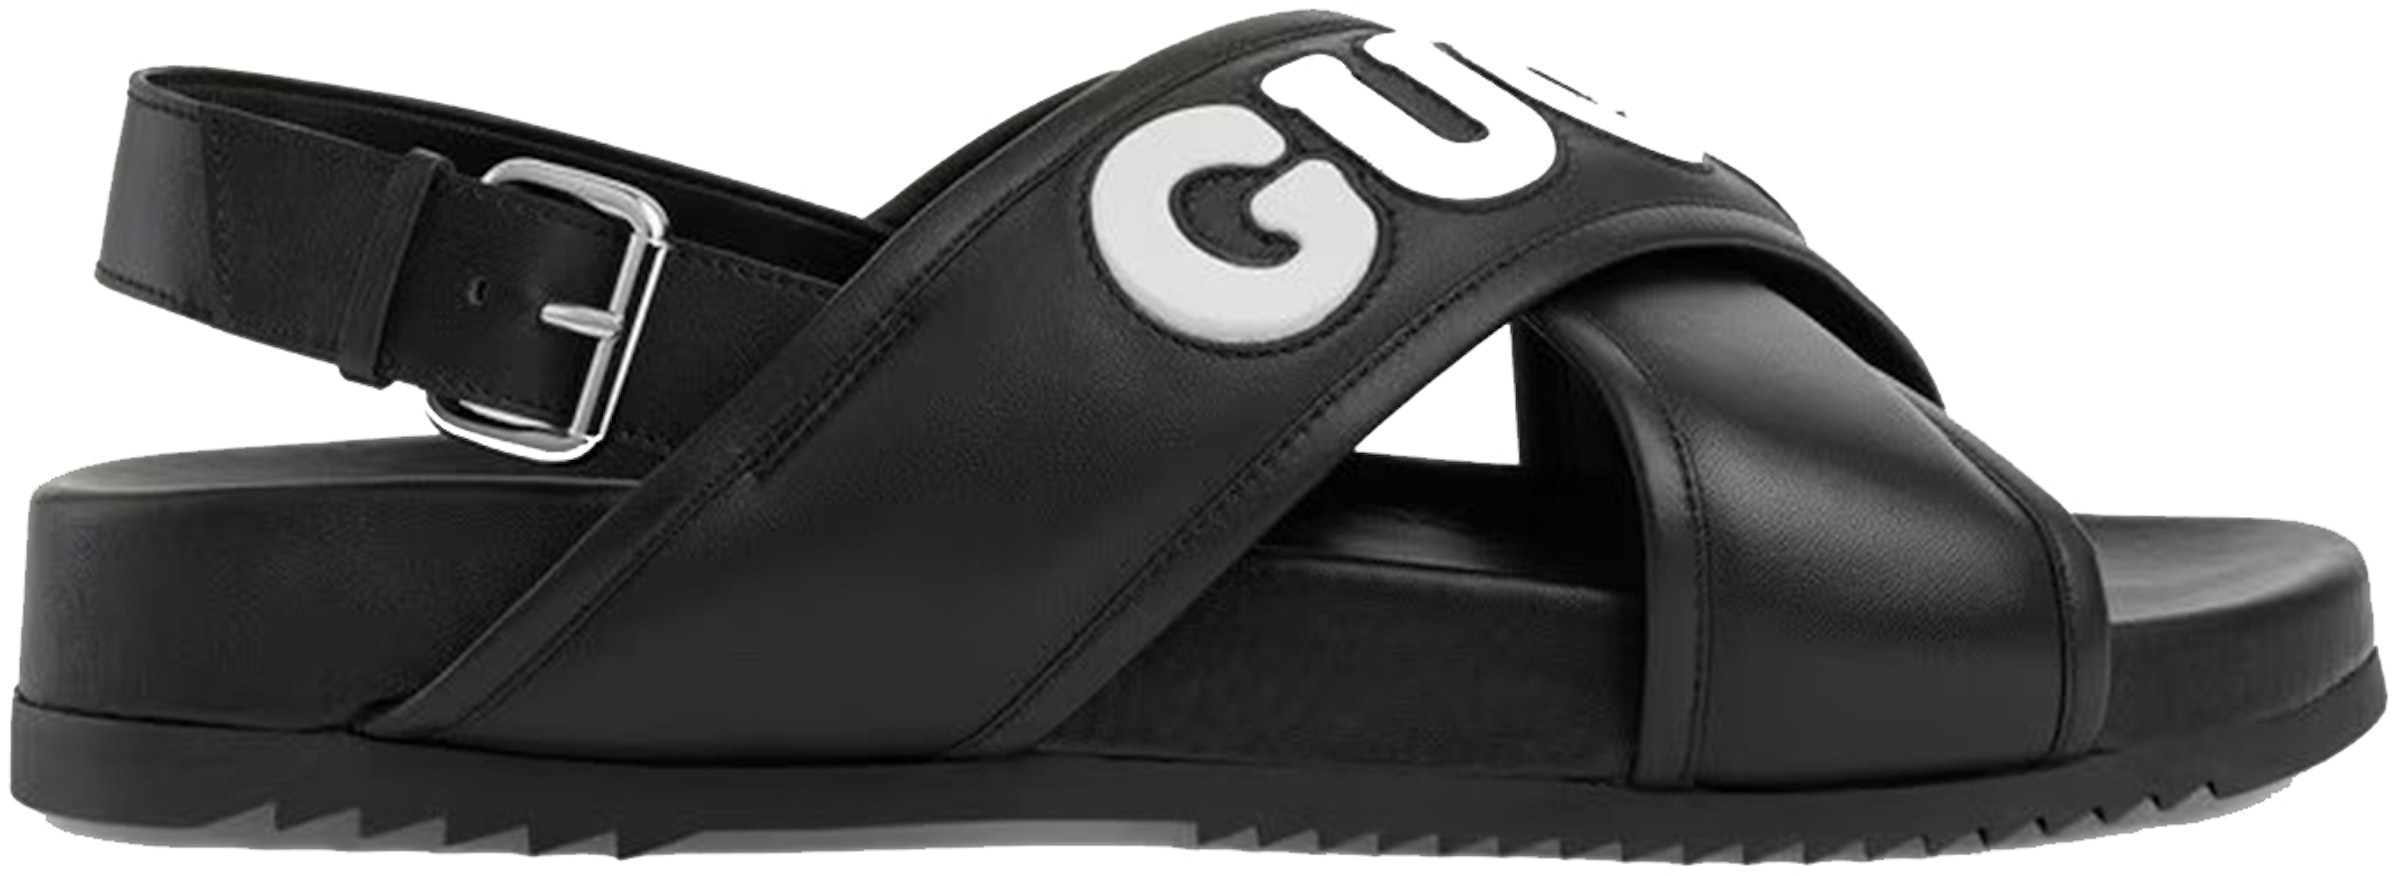 Gucci Crossover Sandals Men's 742024 AABYS 1365 - US